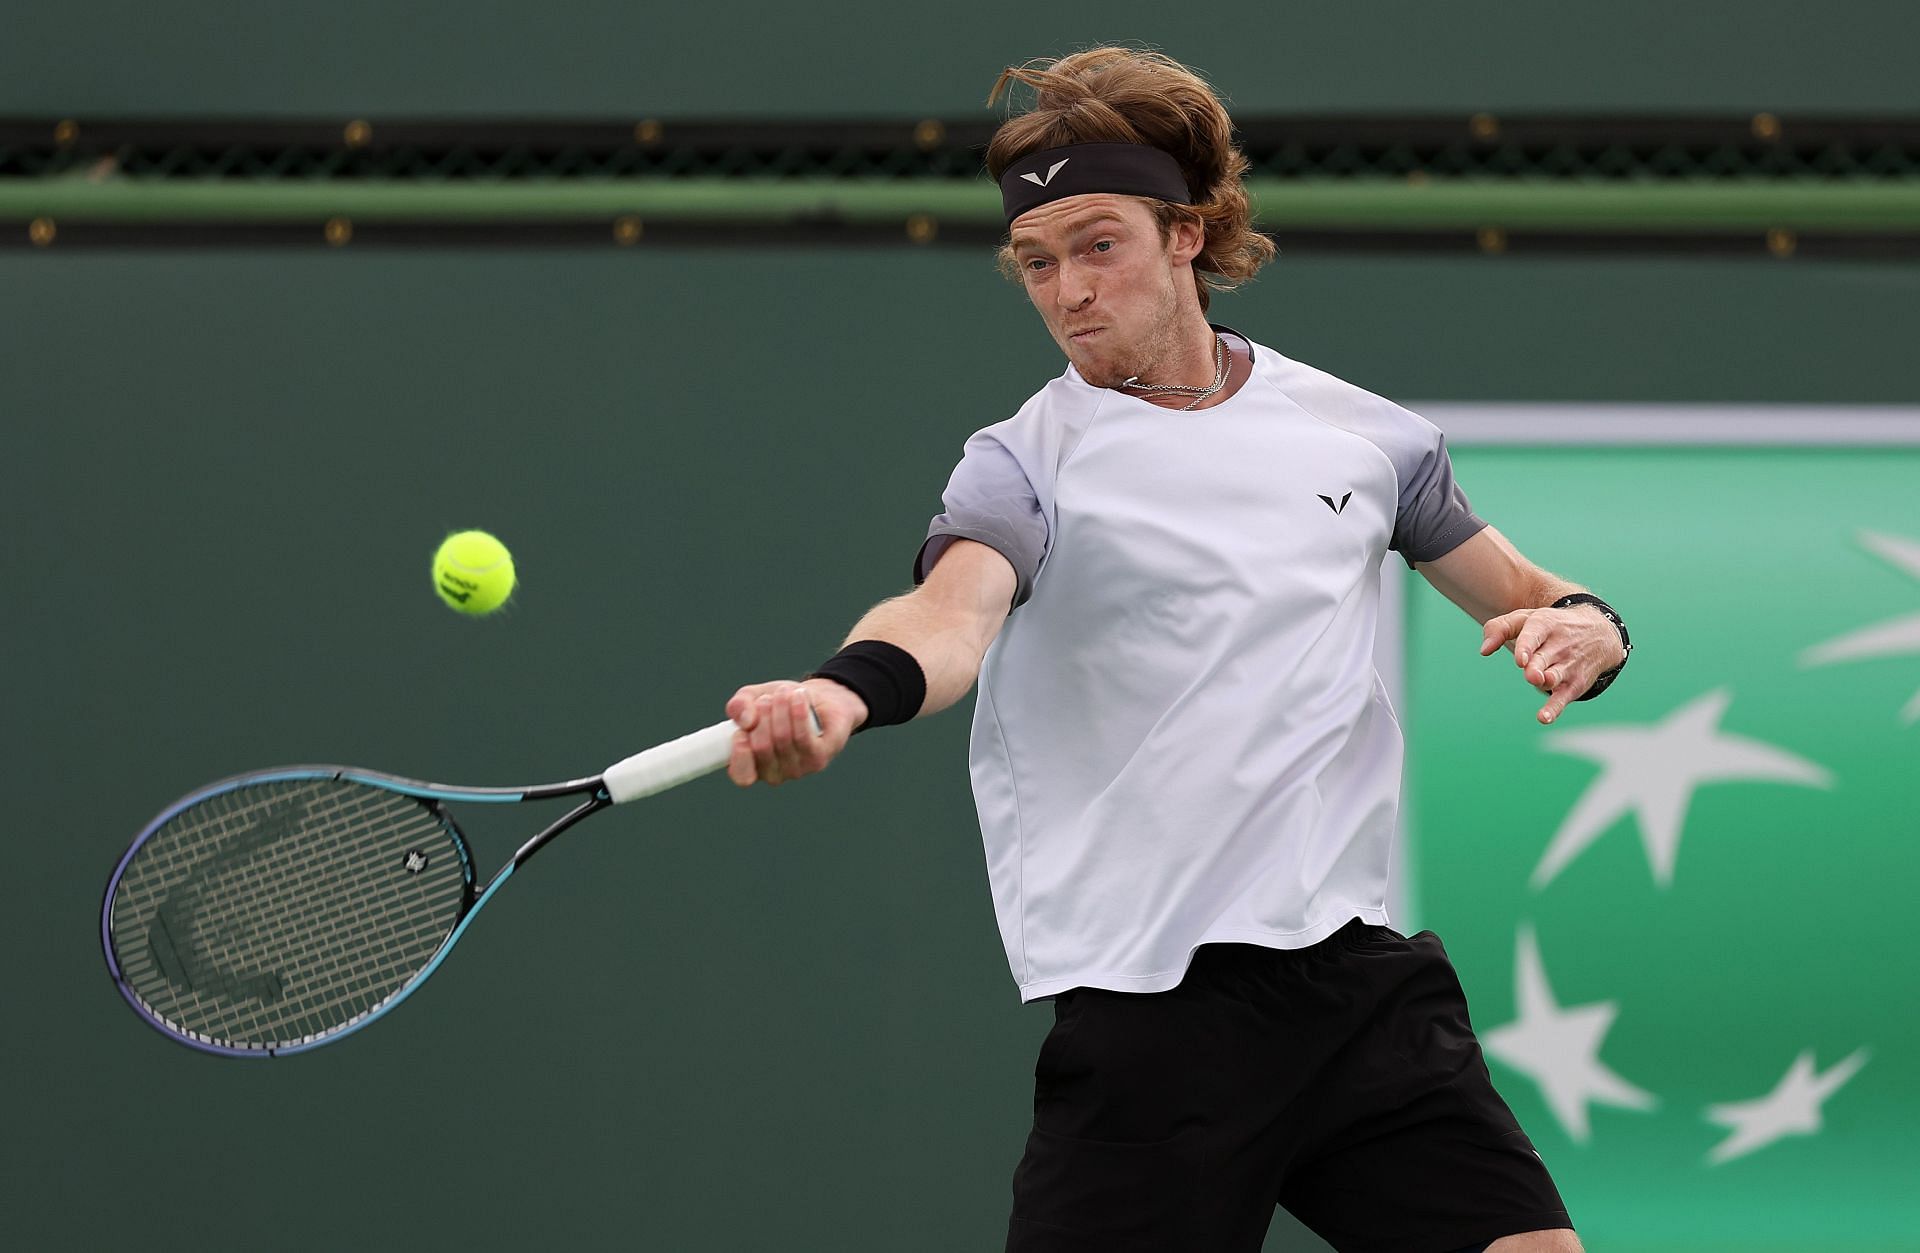 Andrey Rublev at the BNP Paribas Open